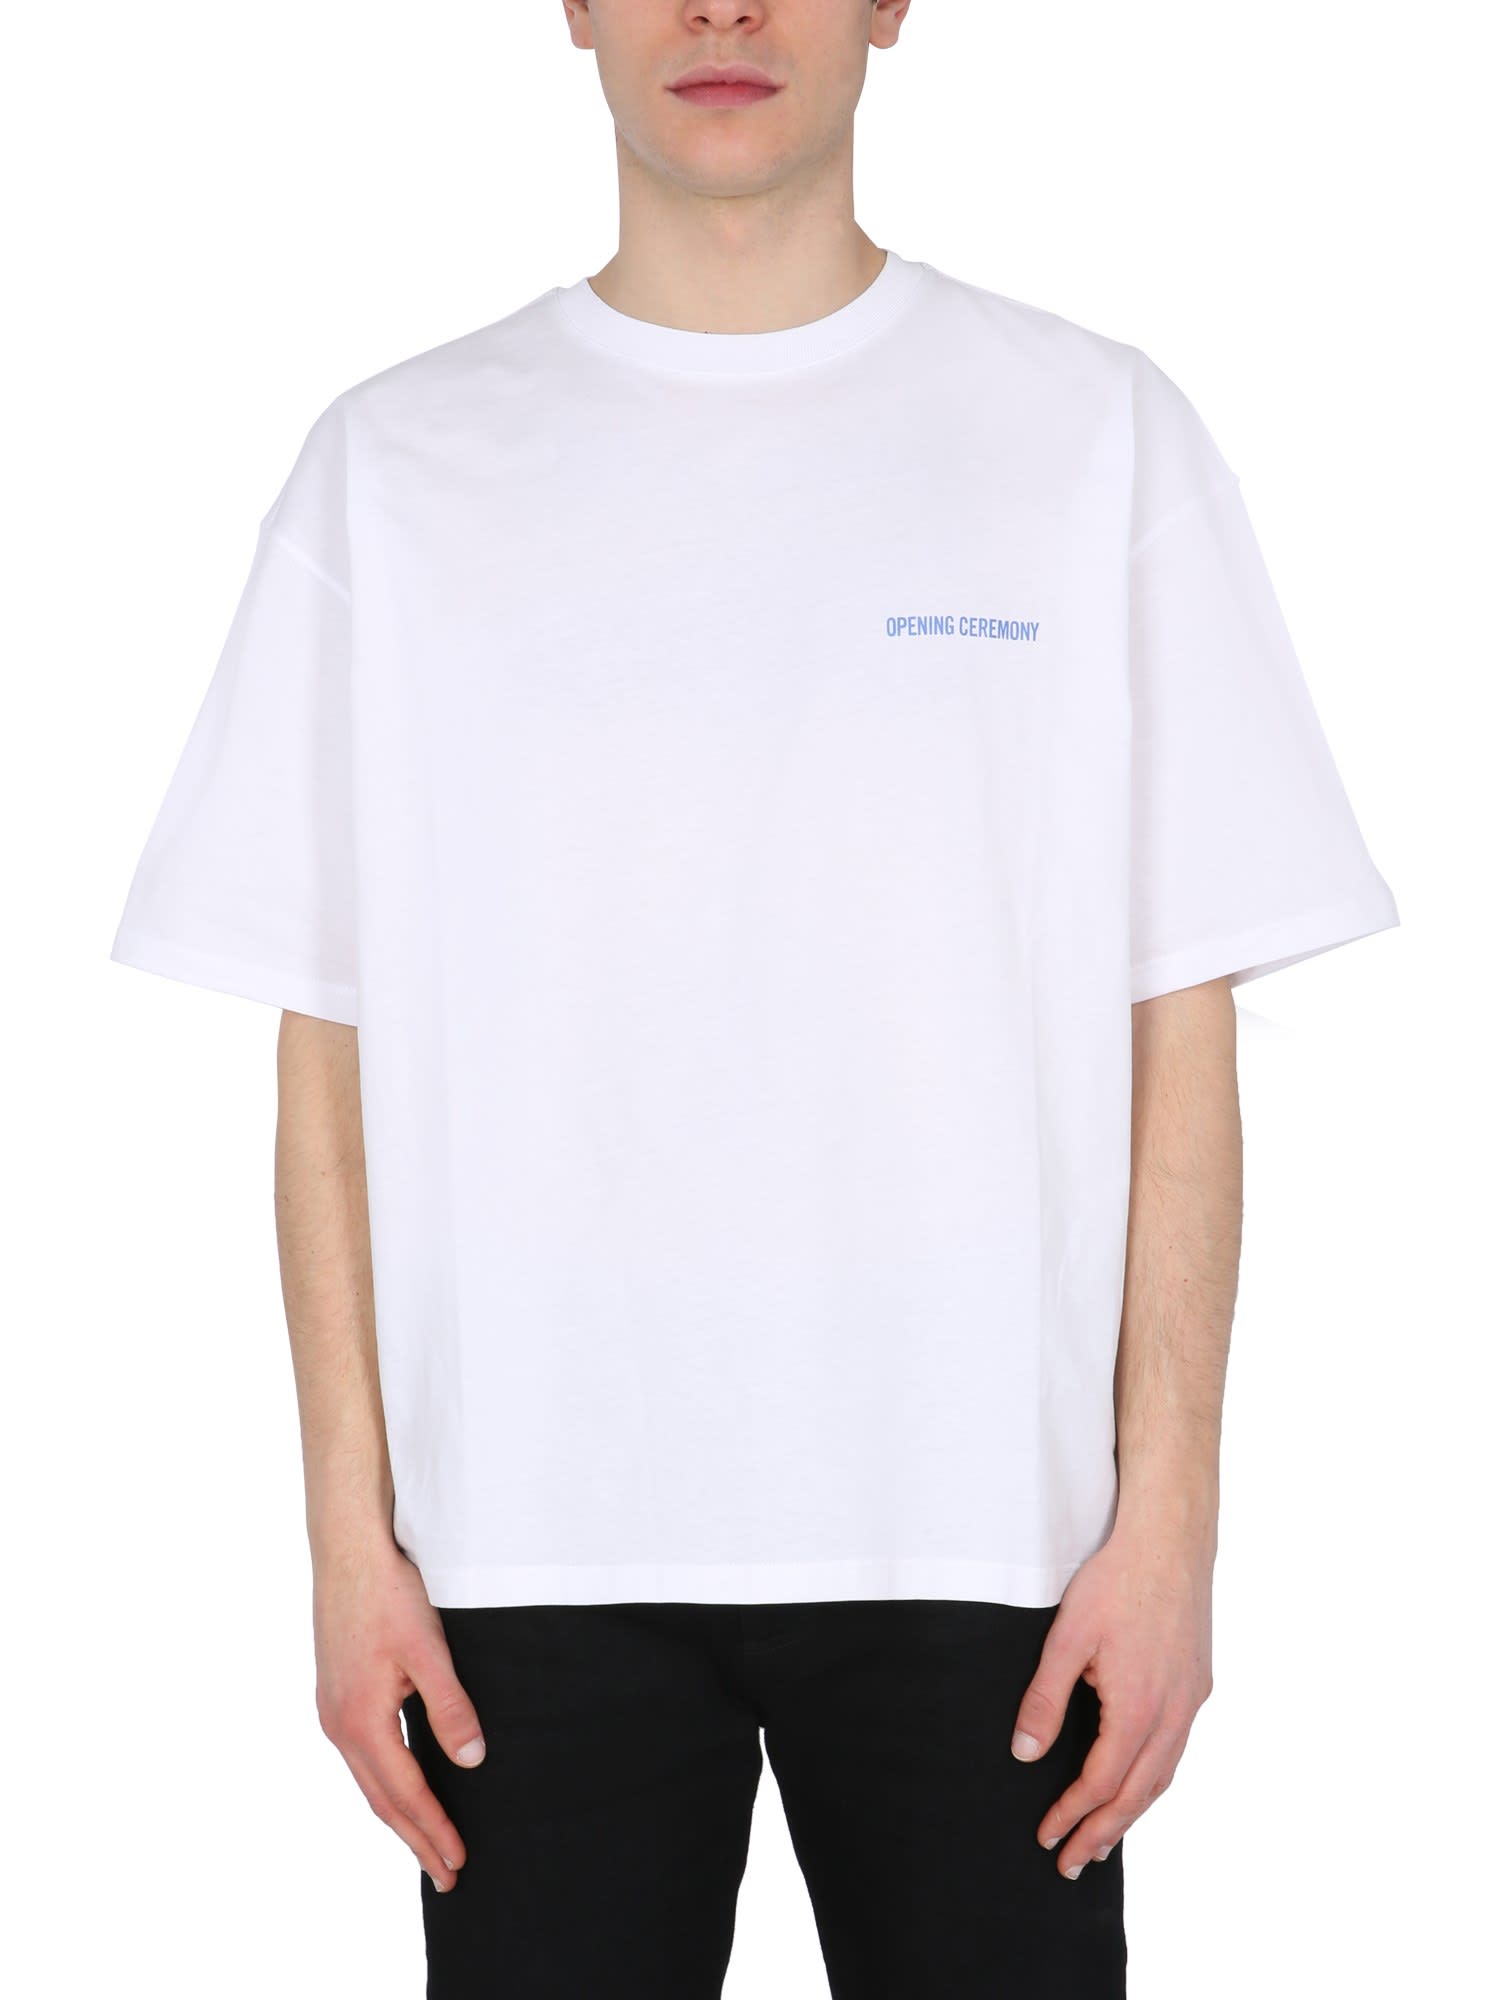 Opening Ceremony Torch Word Print T-shirt